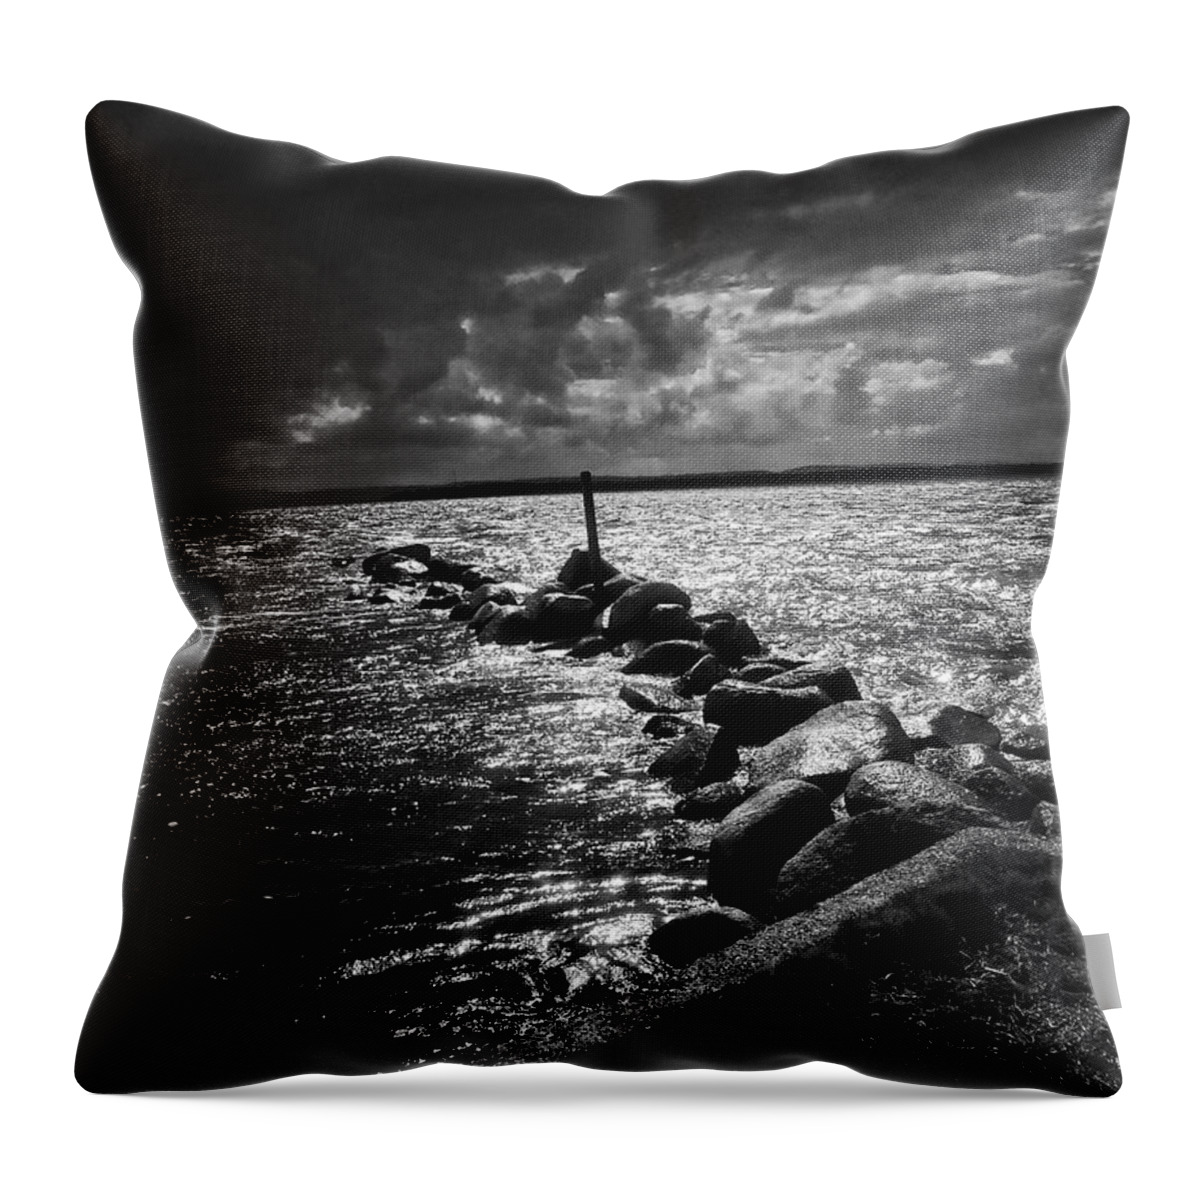 Landscape Throw Pillow featuring the photograph Cloudy Sunlight by Michael Blaine